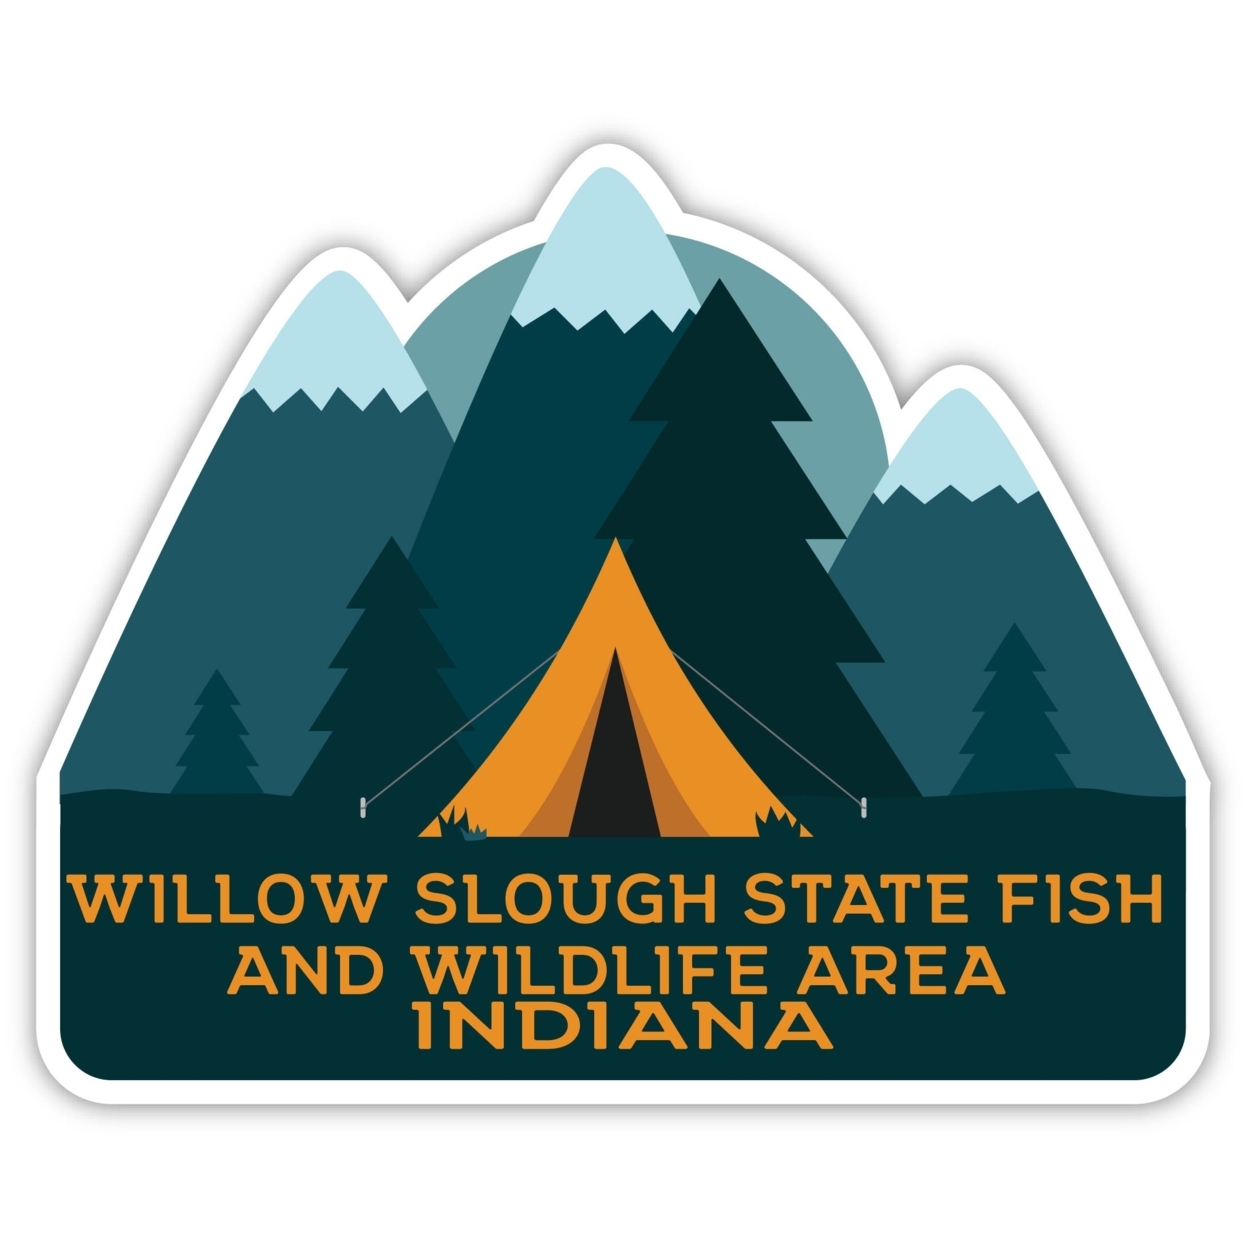 Willow Slough State Fish And Wildlife Area Indiana Souvenir Decorative Stickers (Choose Theme And Size) - Single Unit, 4-Inch, Tent